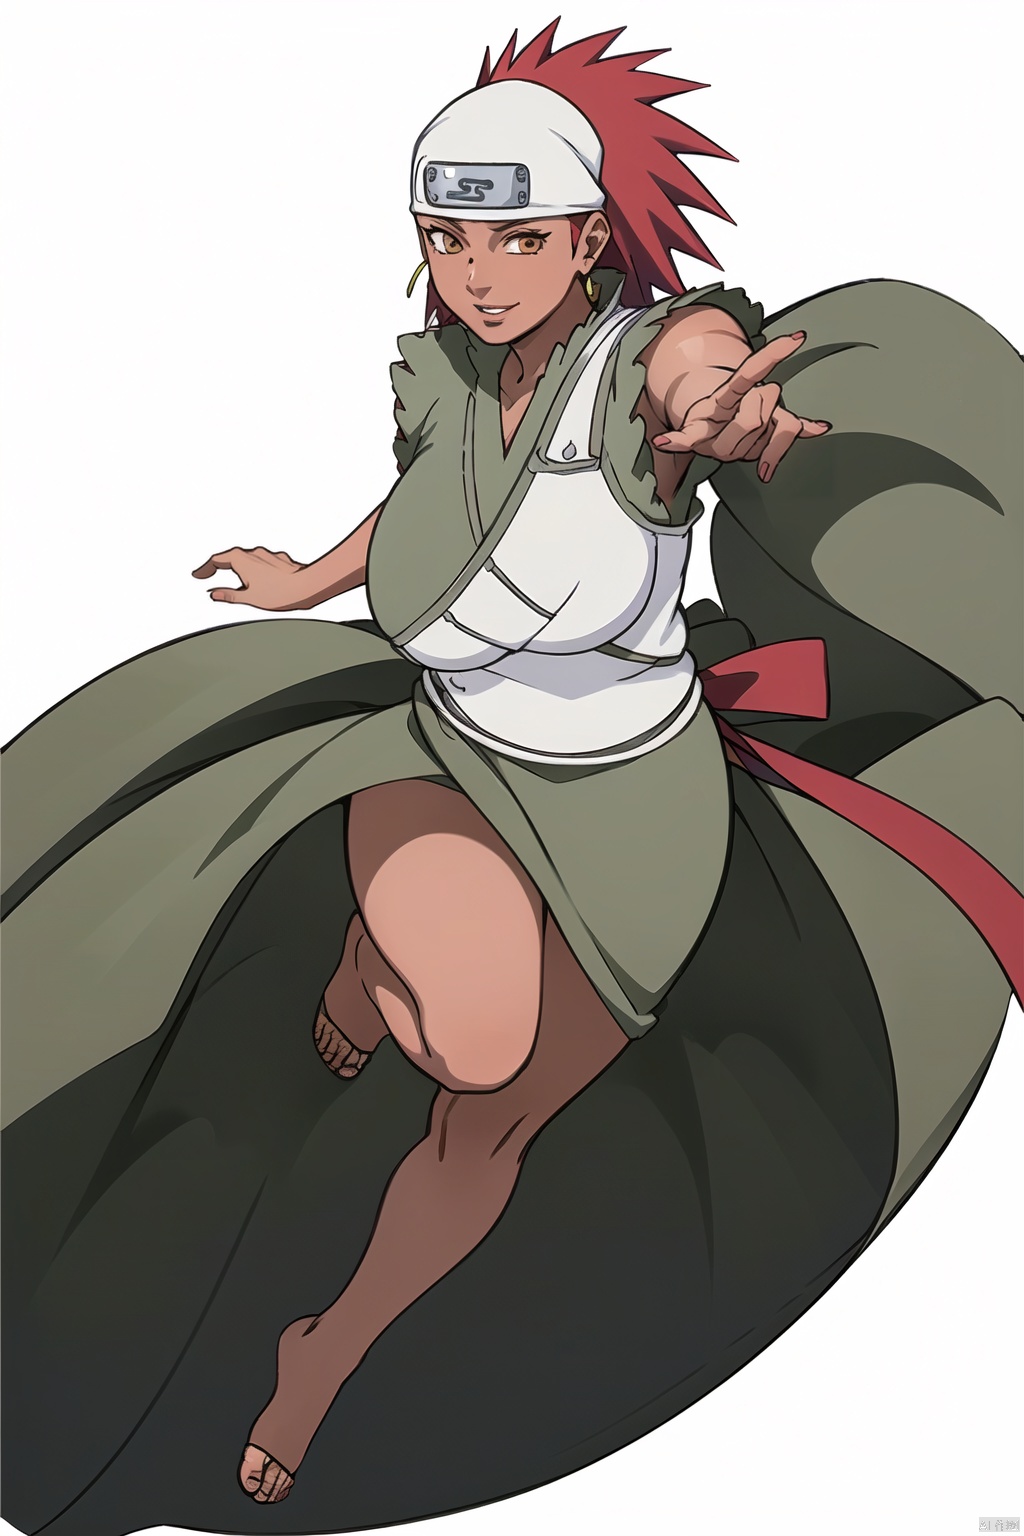 (White background: 1.3),
1 girl, solo, busty, 30 years old, royal sister, pretty,
Short hair, (big breasts :1.3), red hair, Ninja, turban, Grey top, Long skirt, Fine dress, bare feet, bare legs,
Graceful movements, smiling for the camera,
High resolution, master paintings, CG, wallpaper, super Detail, intricate details, masterpieces, 8k, contrast, smooth, bright picture, soft picture, Rembrandt lighting, amazing,
Manga style, manga, anime, Games cg,kaluyi, 